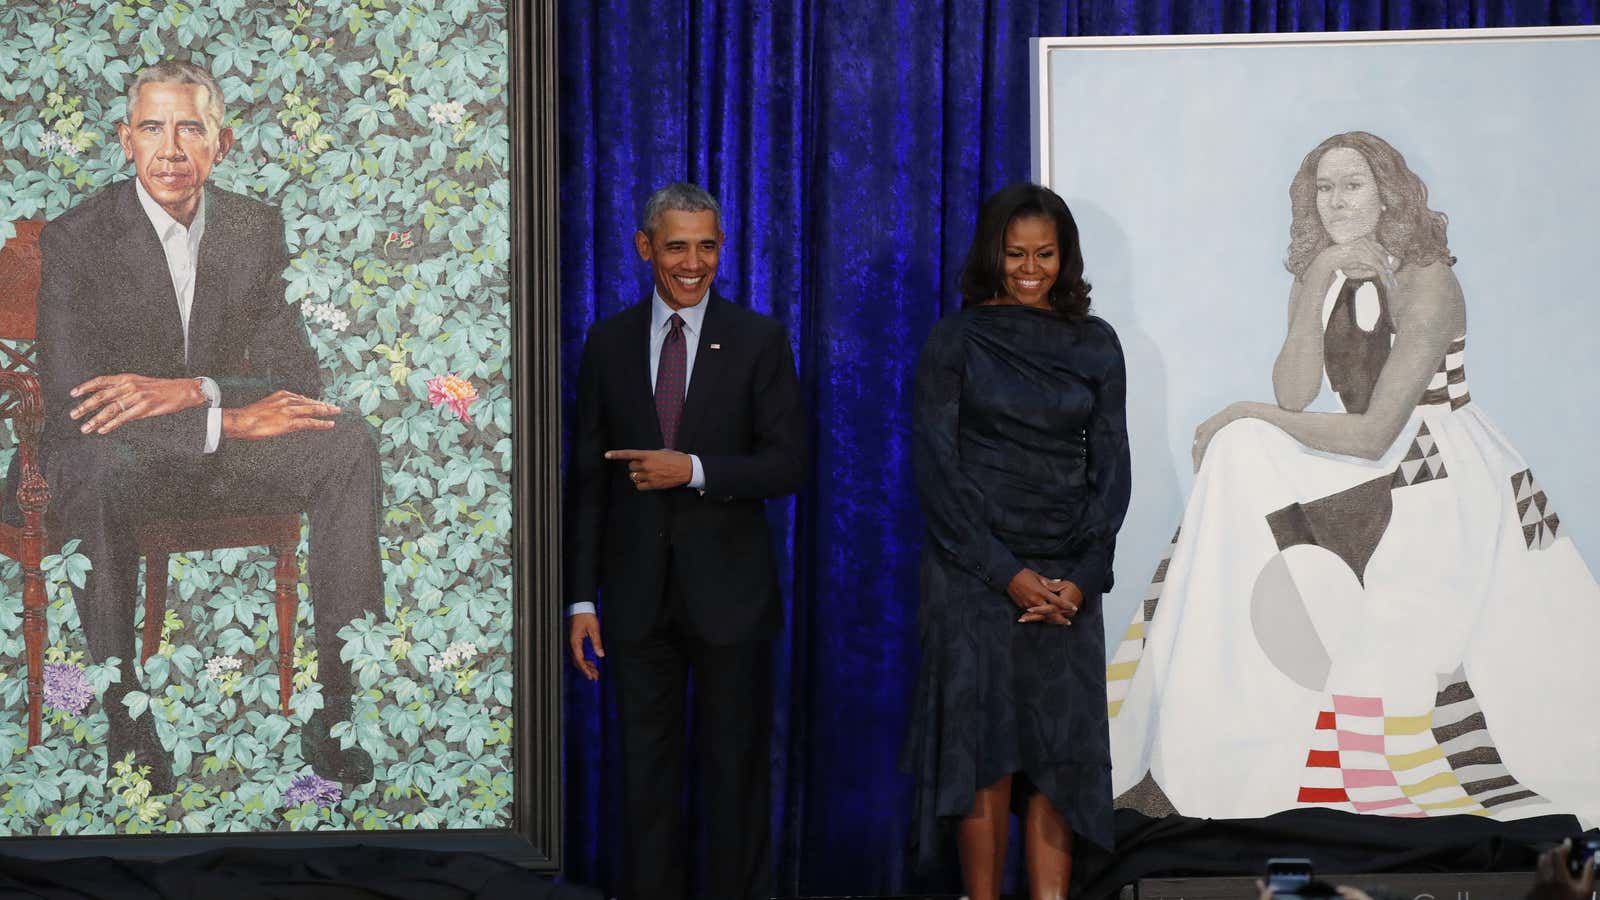 The official portraits of Barack and Michelle Obama, revealed on Monday to a social media frenzy, mark the Obamas’ latest act in reclaiming that unapologetic blackness.